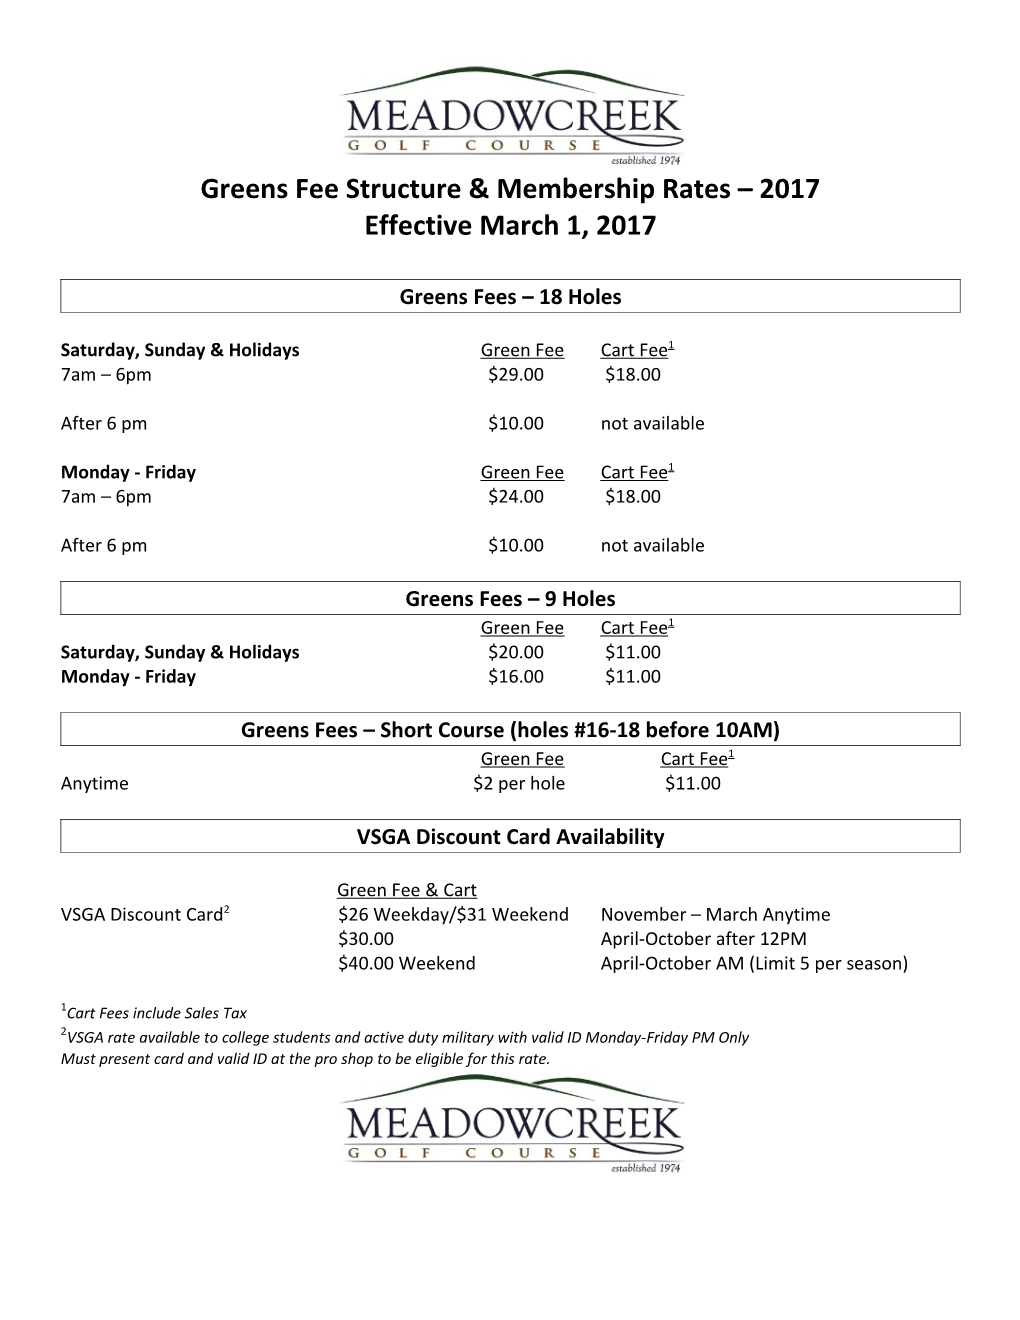 Greens Fee Structure & Membership Rates 2017